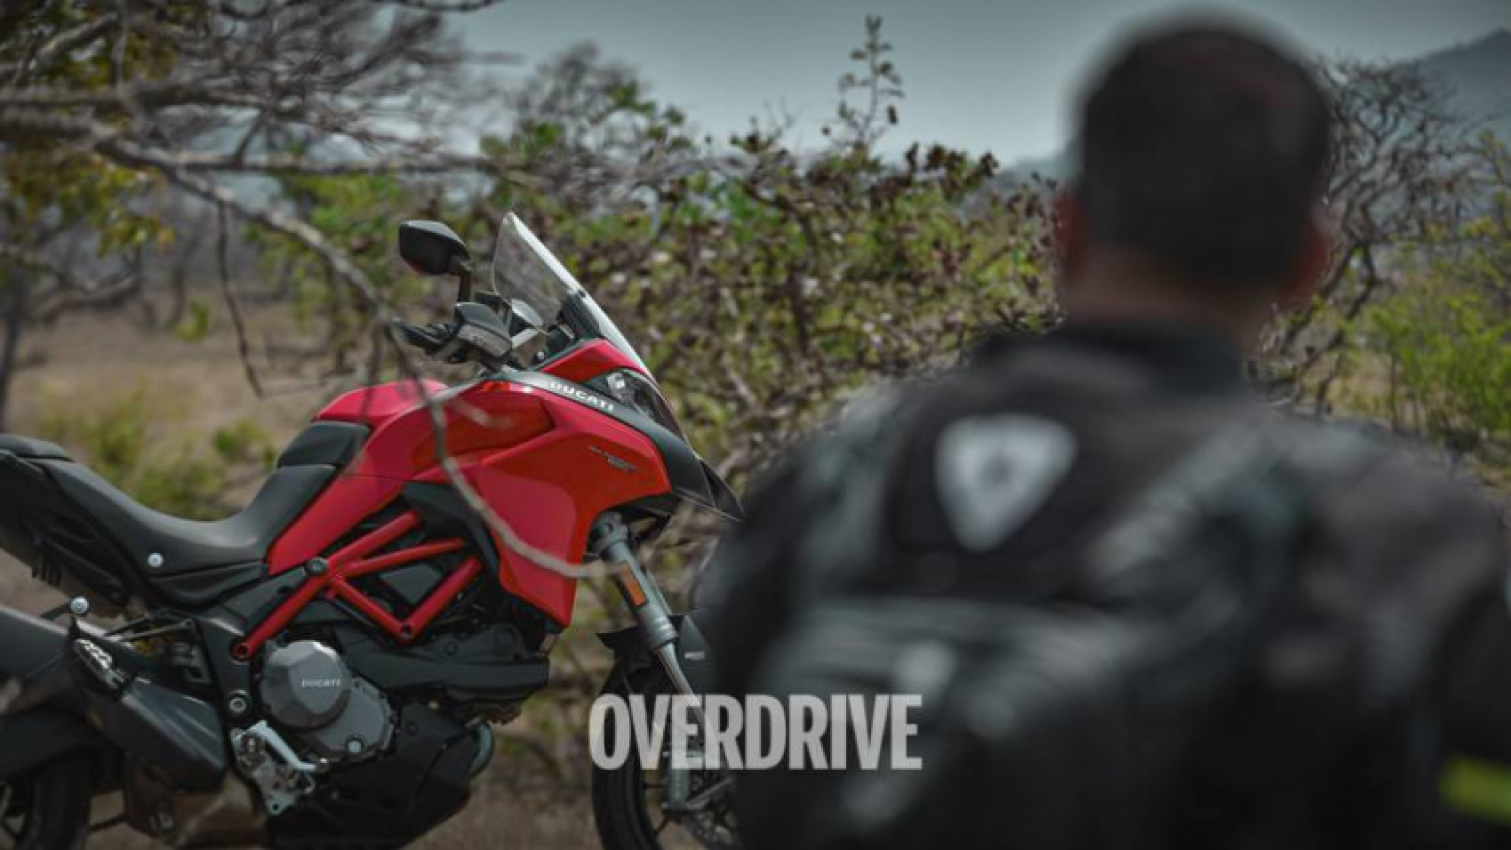 autos, cars, ducati, 2020 ducati multistrada 950 s, 2021 ducati multistrada 950 s, 2021 ducati multistrada v4, ducati multistrada, ducati multistrada 950, ducati multistrada 950 review, ducati multistrada 950 road test, ducati multistrada 950 s, ducati multistrada 950s, ducati multistrada review, ducati multistrada v4, ducati multistrada v4 2021, ducati multistrada v4 review, ducati multistrada v4 sound, multistrada, multistrada 950, new 2021 ducati multistrada 950 s highlight, new ducati multistrada v4, overdrive, review, road test, 2021 ducati multistrada 950s road test review - the fast, red italian is worth every penny!